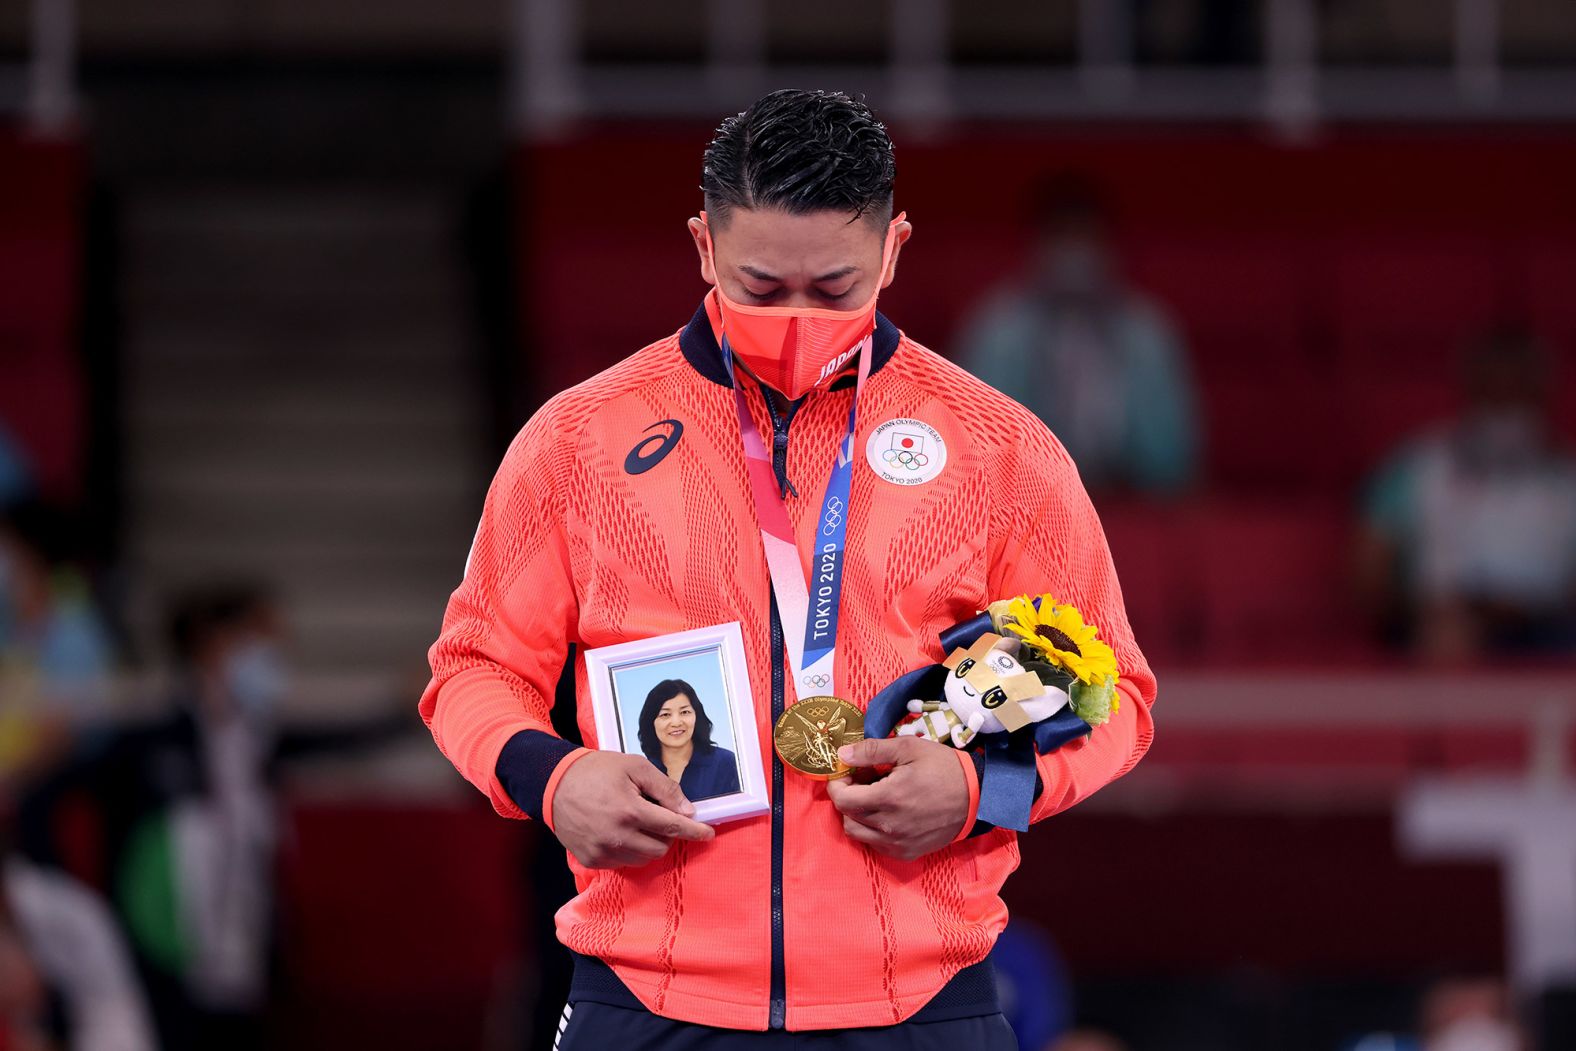 Japan's Ryo Kiyuna holds a photo of his late mother after <a href="index.php?page=&url=https%3A%2F%2Fwww.cnn.com%2Fworld%2Flive-news%2Ftokyo-2020-olympics-08-06-21-spt%2Fh_847fb05b498eda3551989c461857a2e8" target="_blank">winning gold in karate's kata event</a> on August 6. Kiyuna is from the island of Okinawa, which is considered the birthplace of karate.